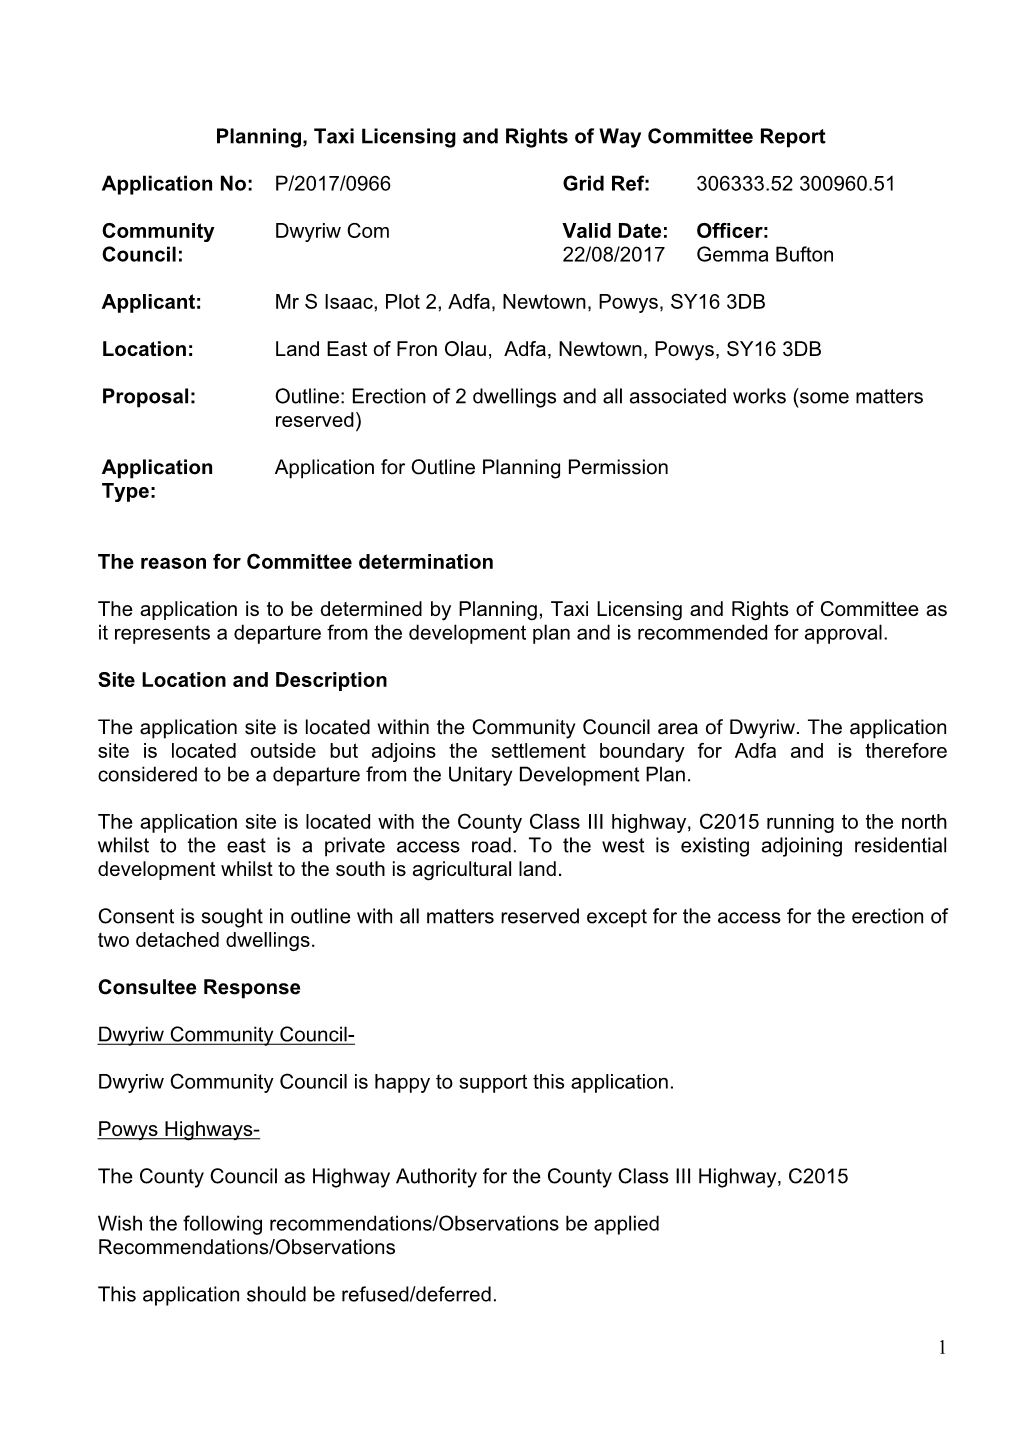 1 Planning, Taxi Licensing and Rights of Way Committee Report Application No: P/2017/0966 Grid Ref: 306333.52 300960.51 Communit